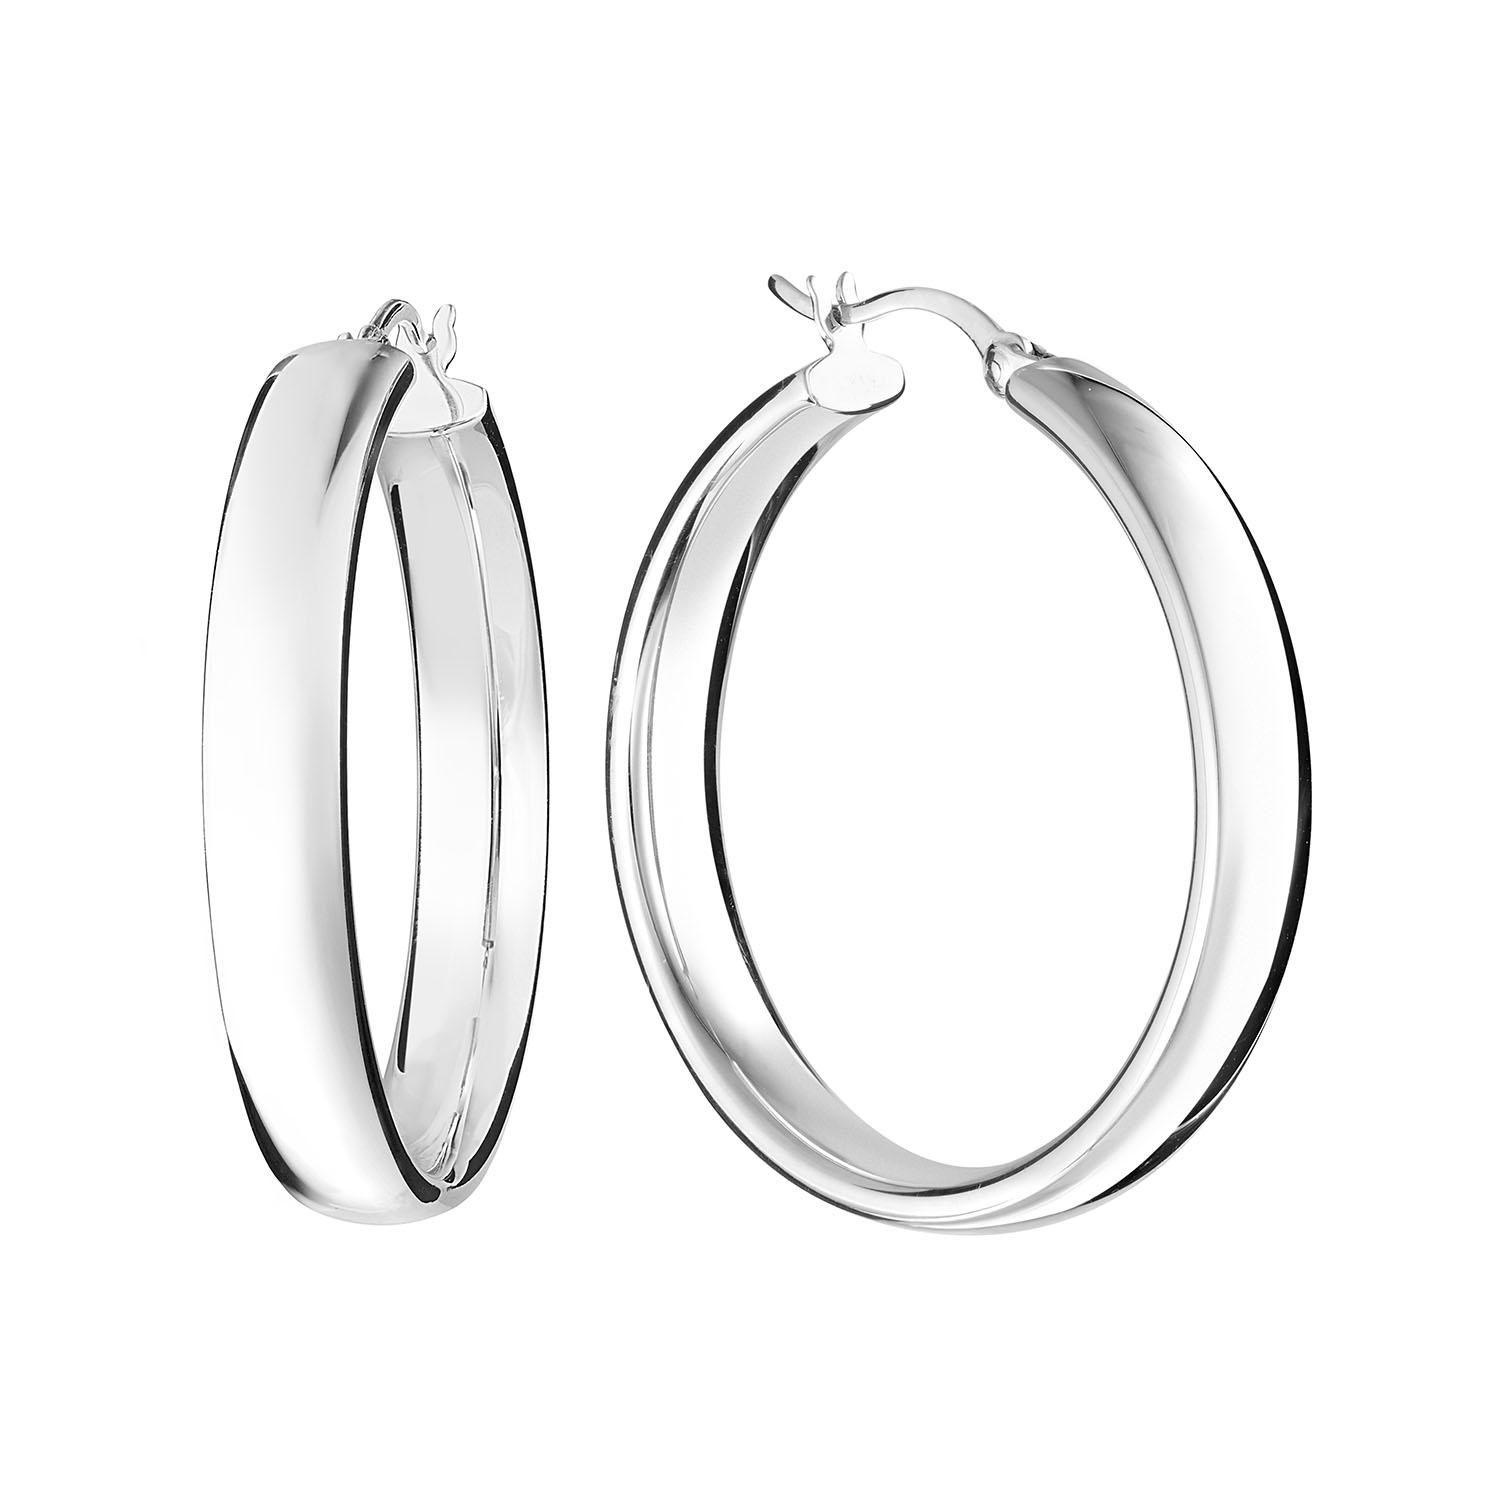 Sterling Silver High Polished Wedding Band Style Hoop Earrings 30mm